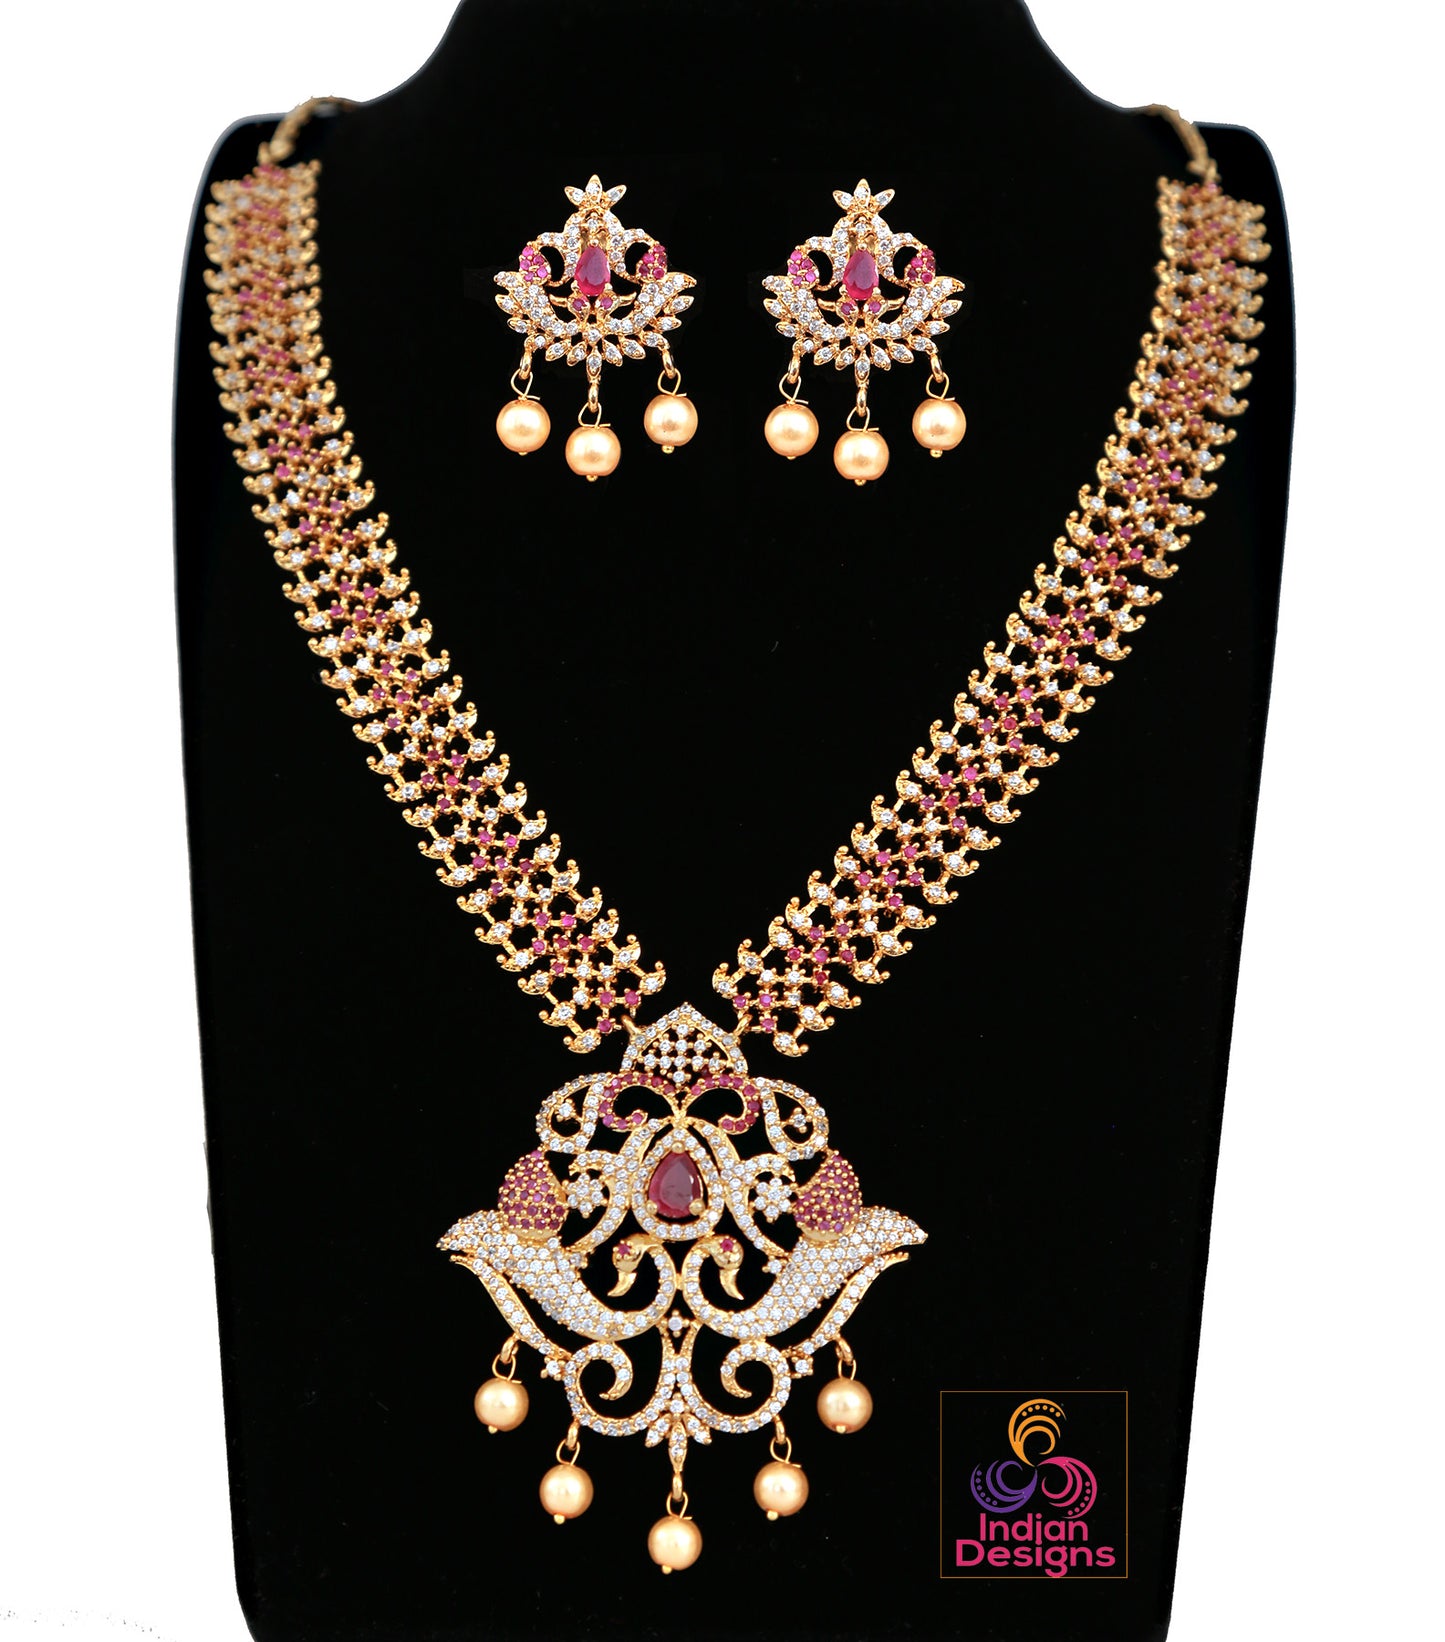 Gold Plated American Diamond Peacock Designer Necklace | CZ Ruby Emerald Crystal Jewelry